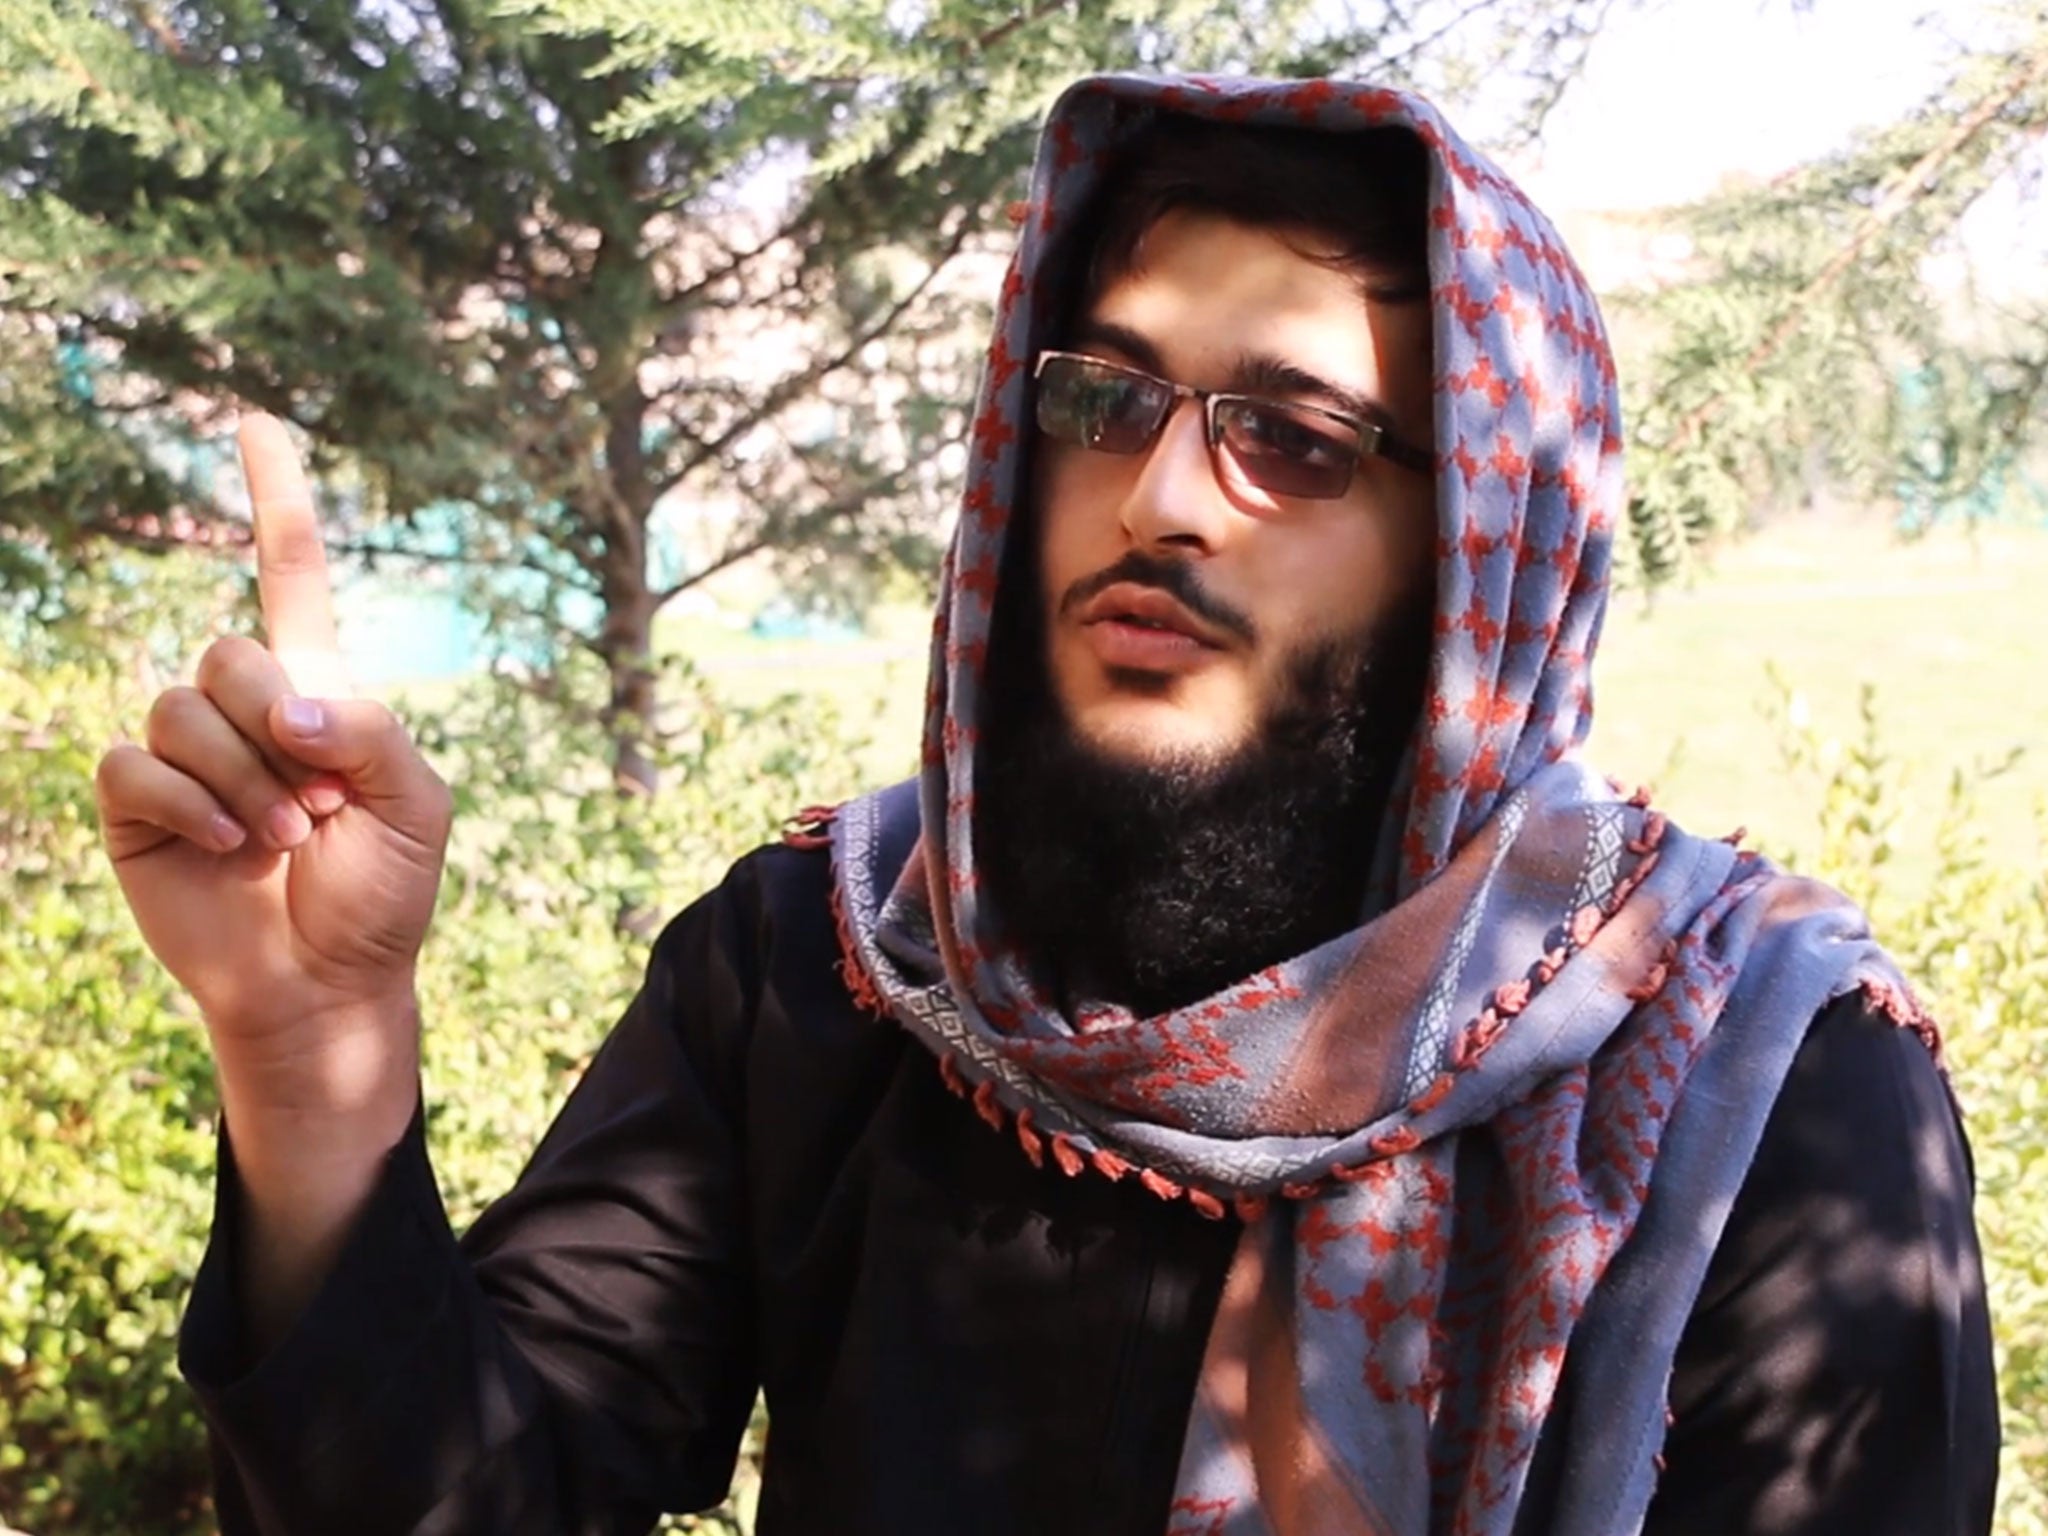 One Isis militant gestures during the video threatening attacks on the West